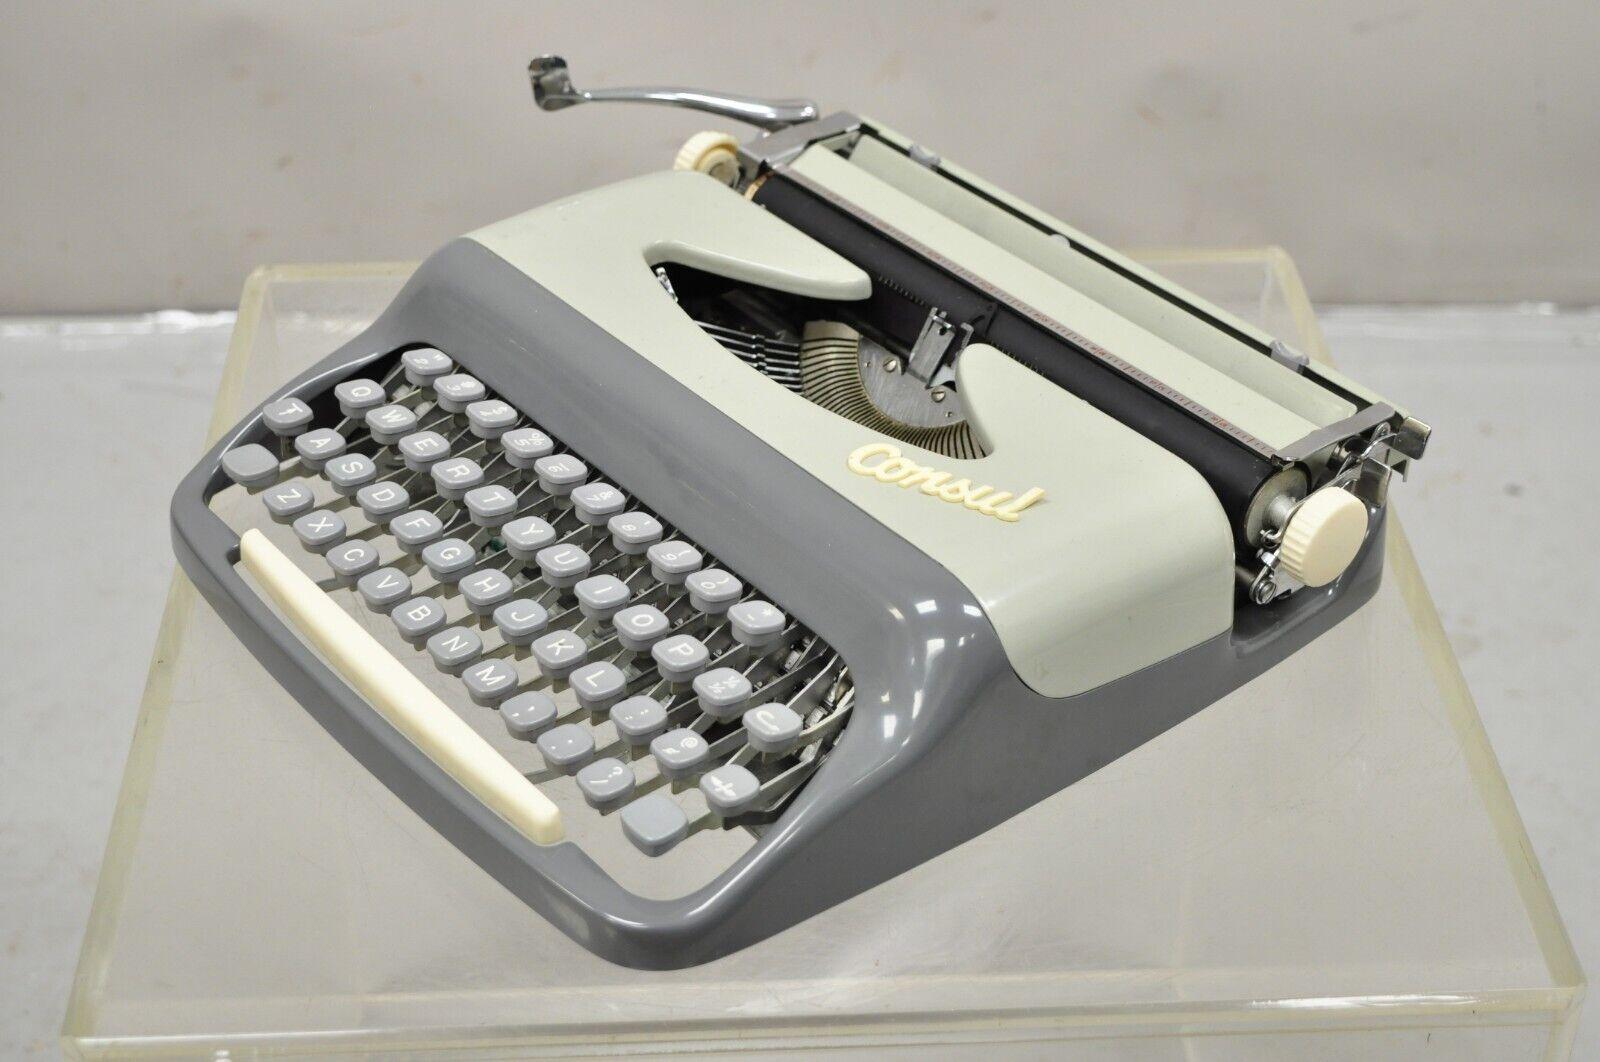 Vintage 1965 Consul 232 Portable Typewriter in two-tone slate/sky grey in Case For Sale 4